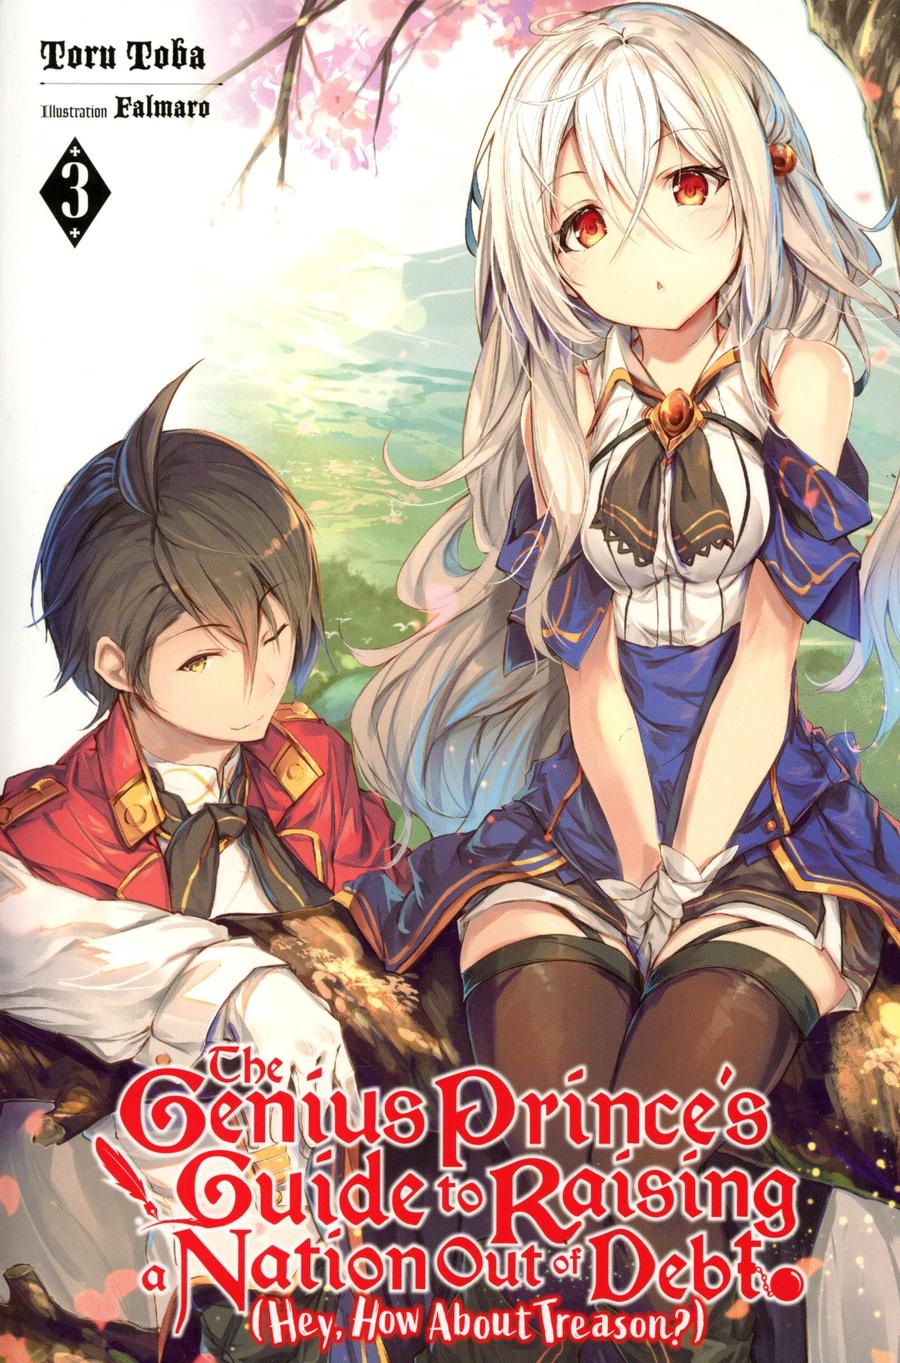 Genius Princes Guide To Raising A Nation Out Of Debt (Hey How About Treason) Light Novel Vol 3